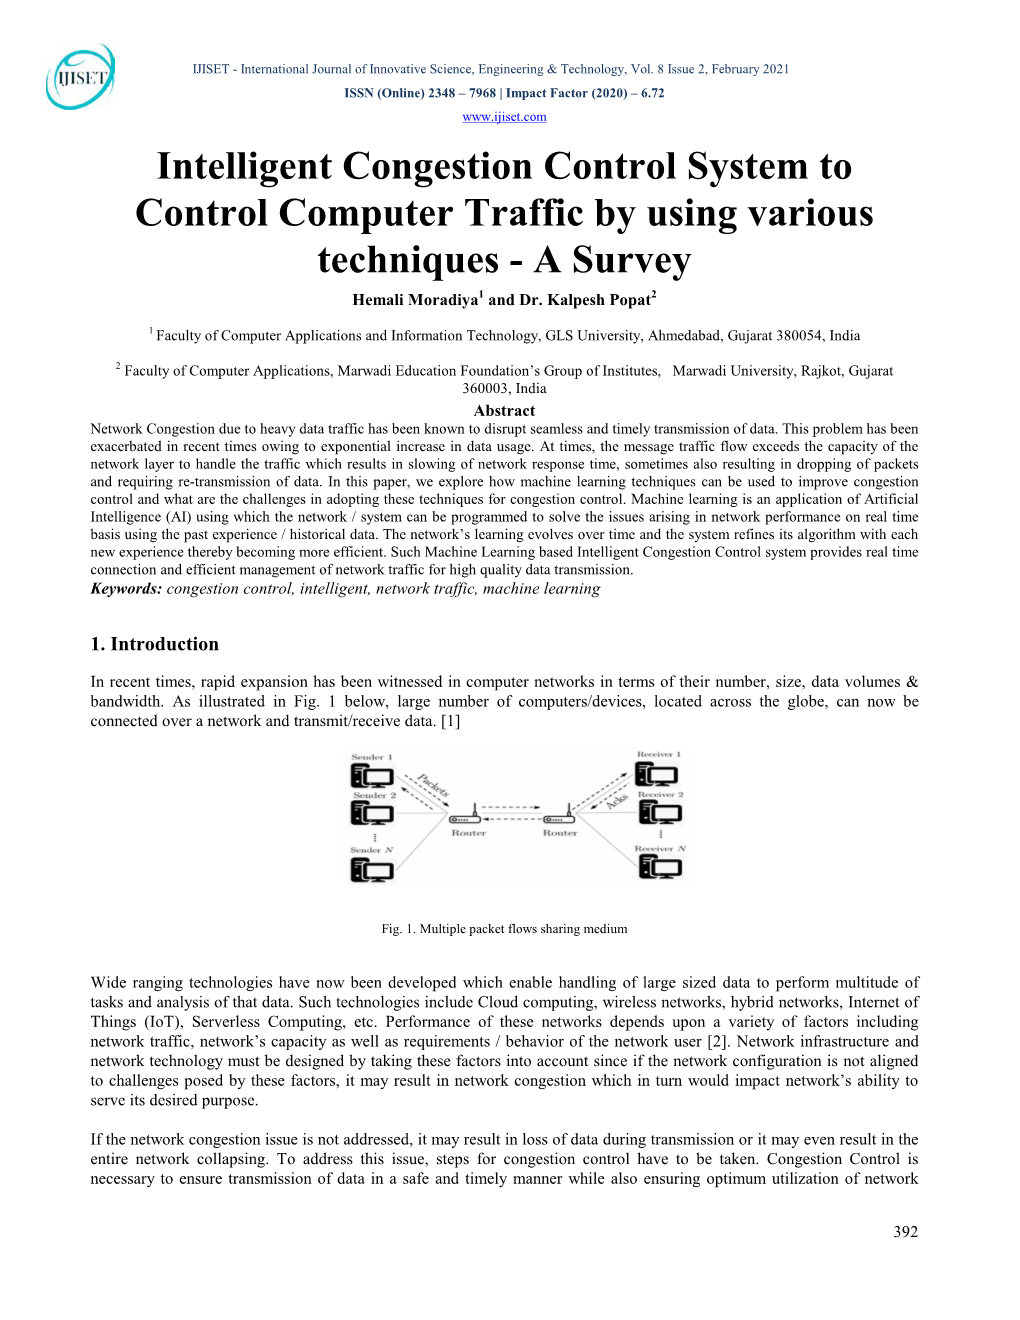 Intelligent Congestion Control System to Control Computer Traffic by Using Various Techniques - a Survey Hemali Moradiya1 and Dr